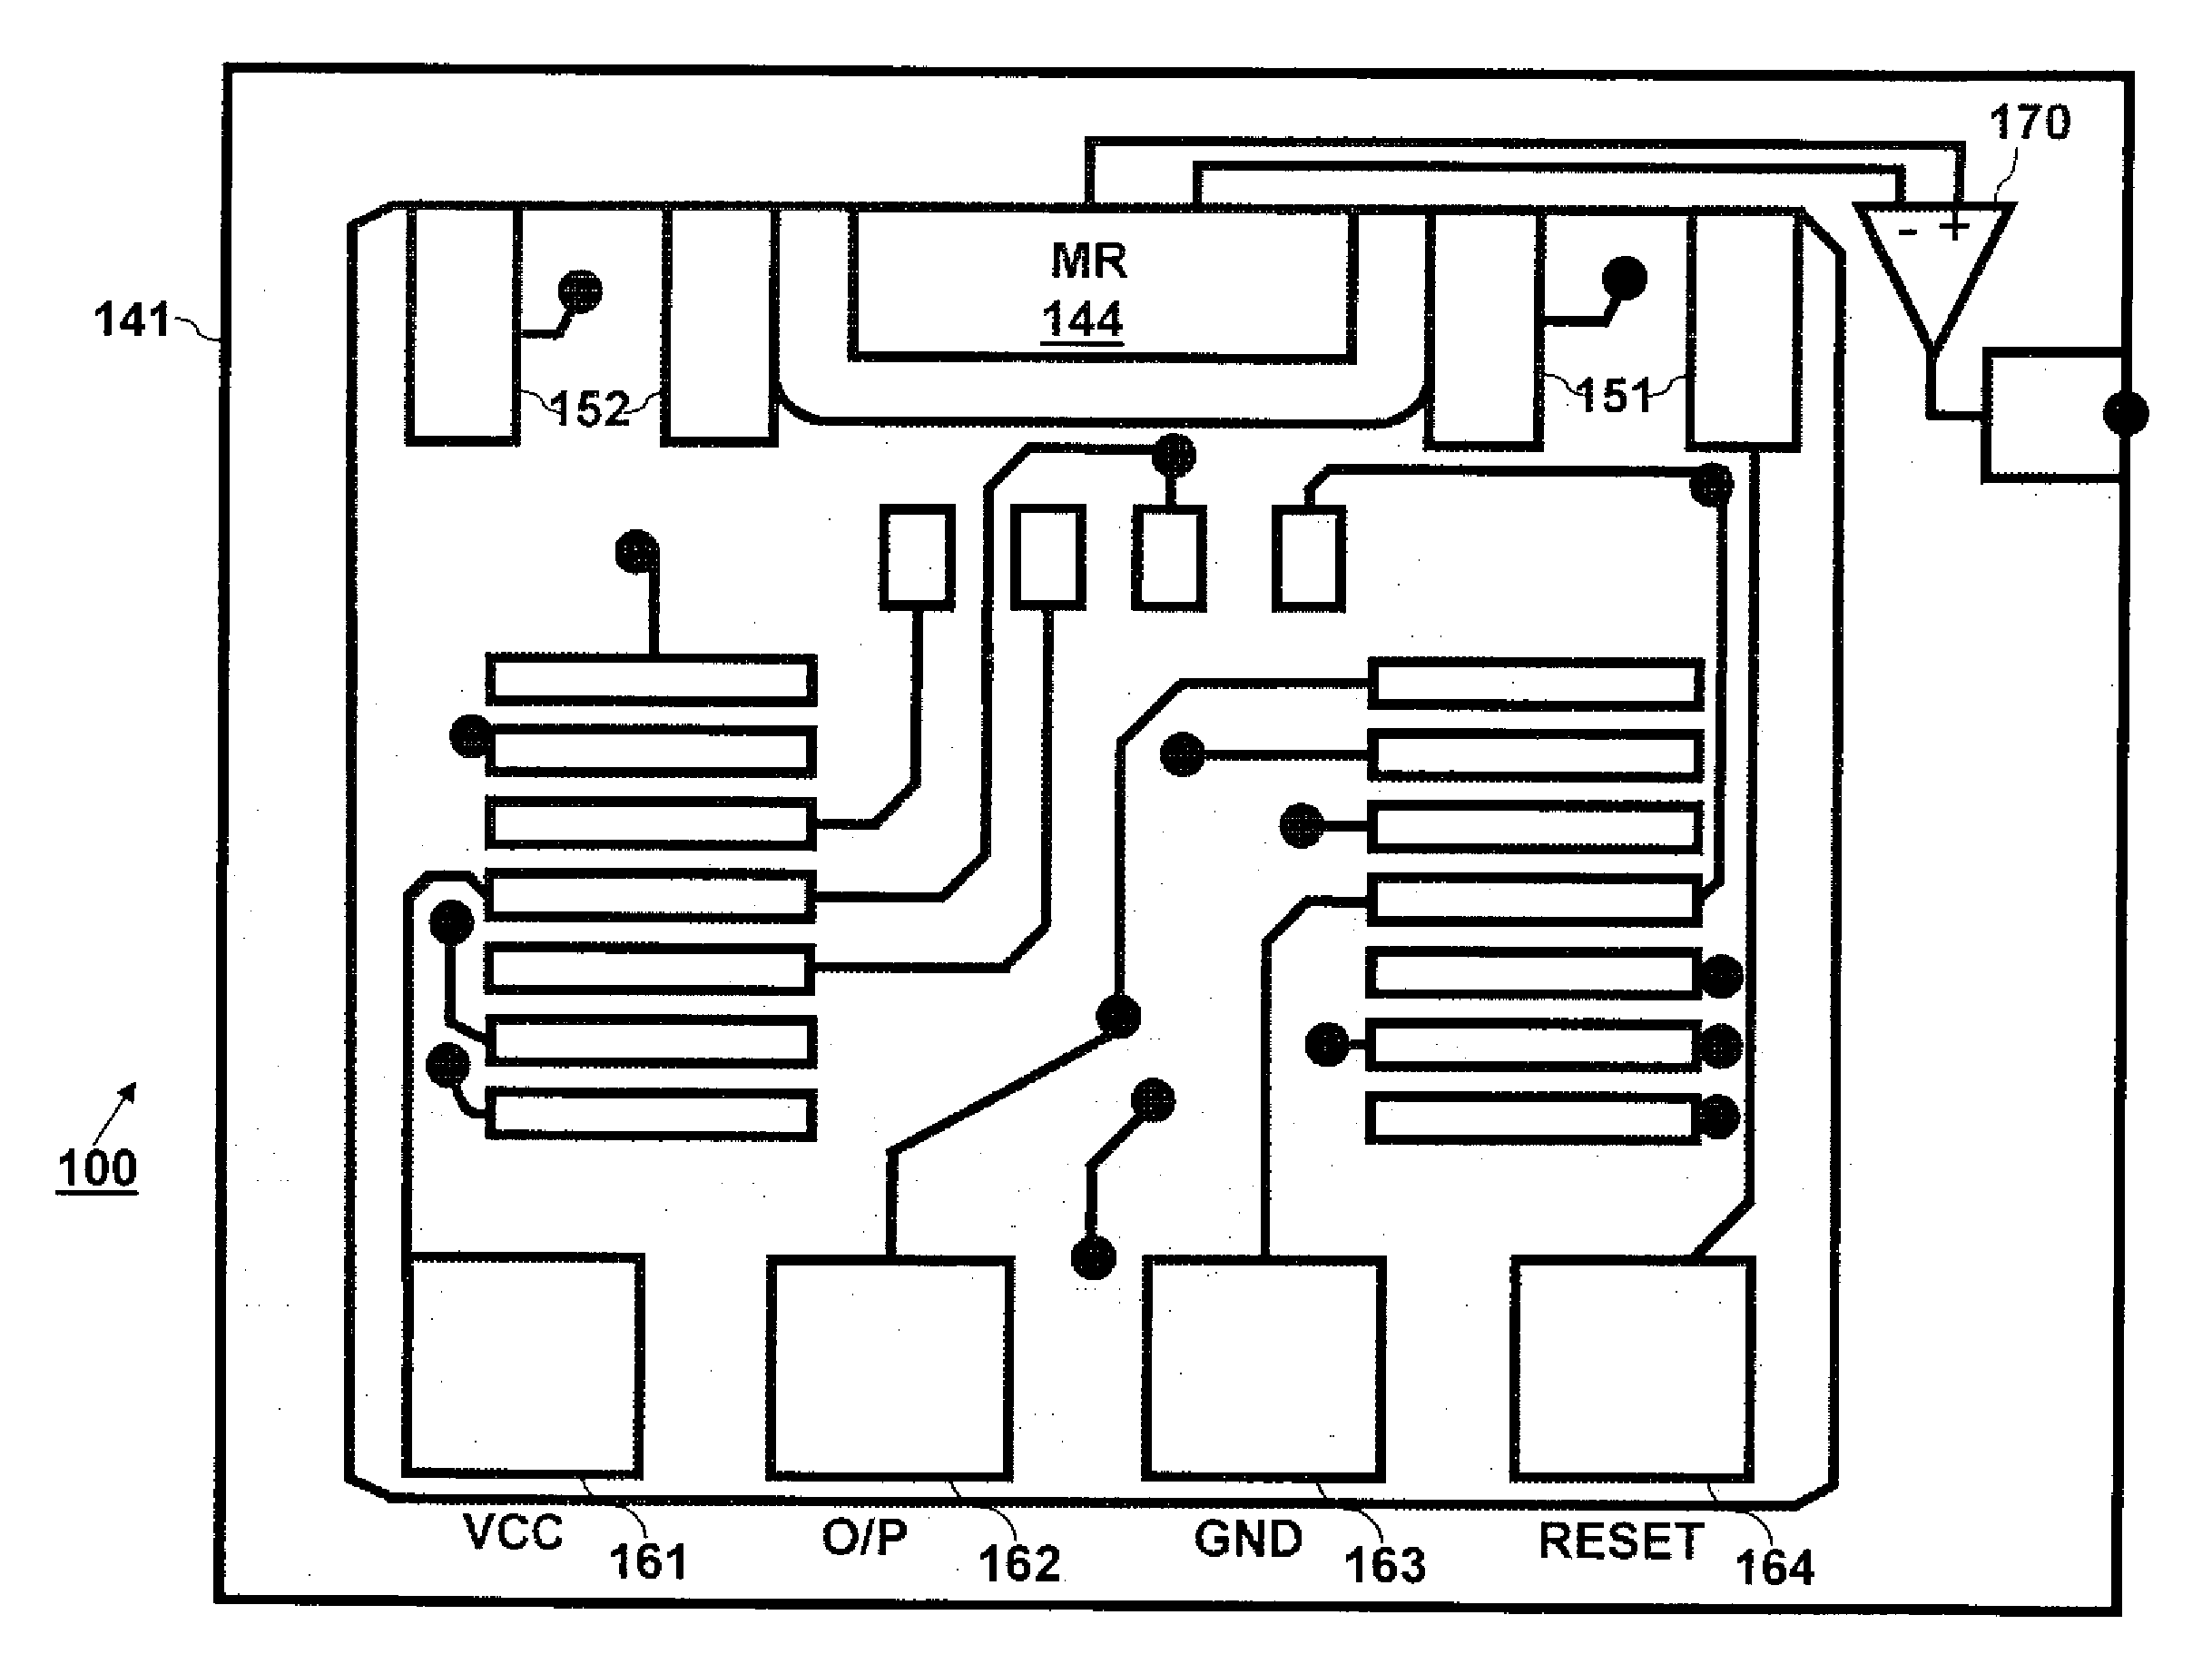 Non-contact magnetic pattern recognition sensor